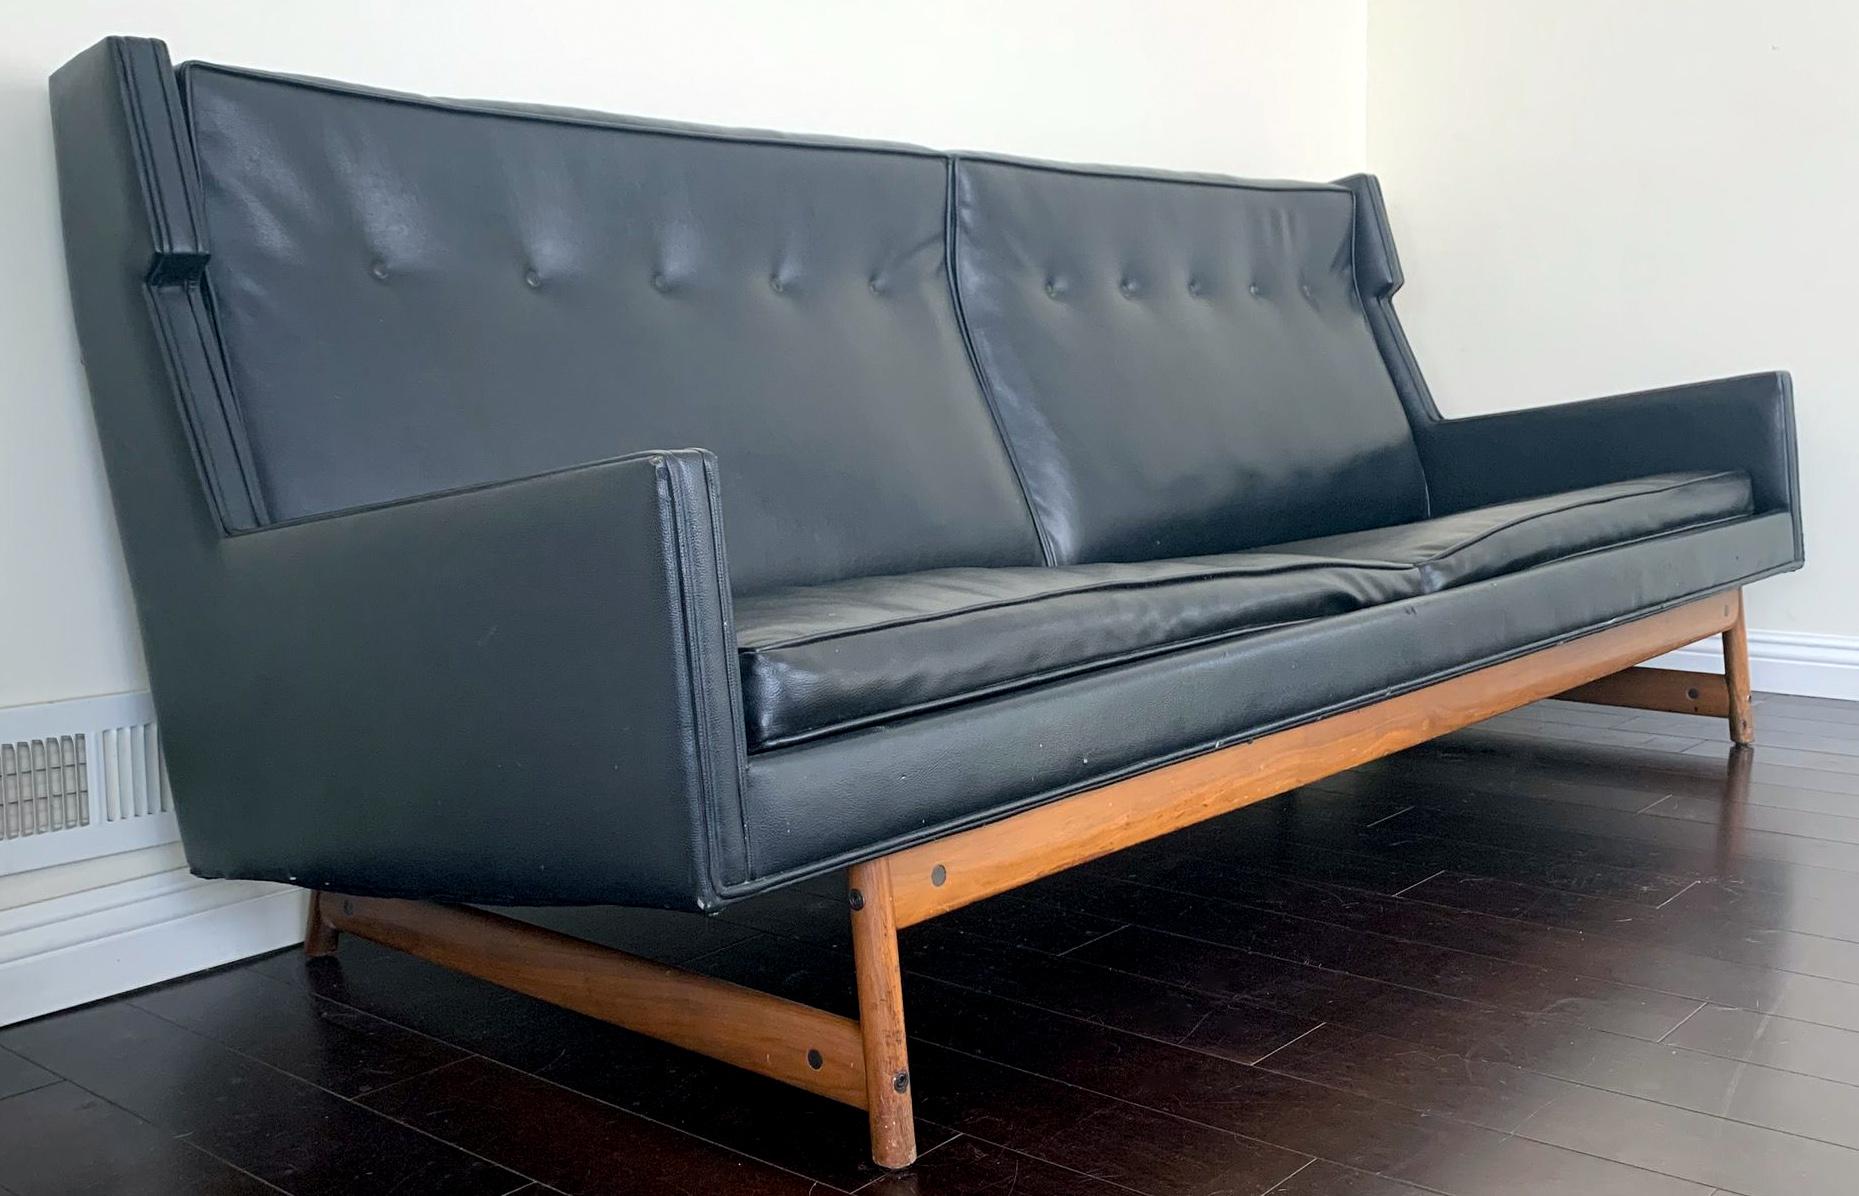 Available right now we have this absolutely stunning George Kasperian wingback sofa. This 1970s sculptural sofa features a black weathered leather upholstery with a gorgeous natural walnut splayed leg frame so beautiful it would be a crime to hide